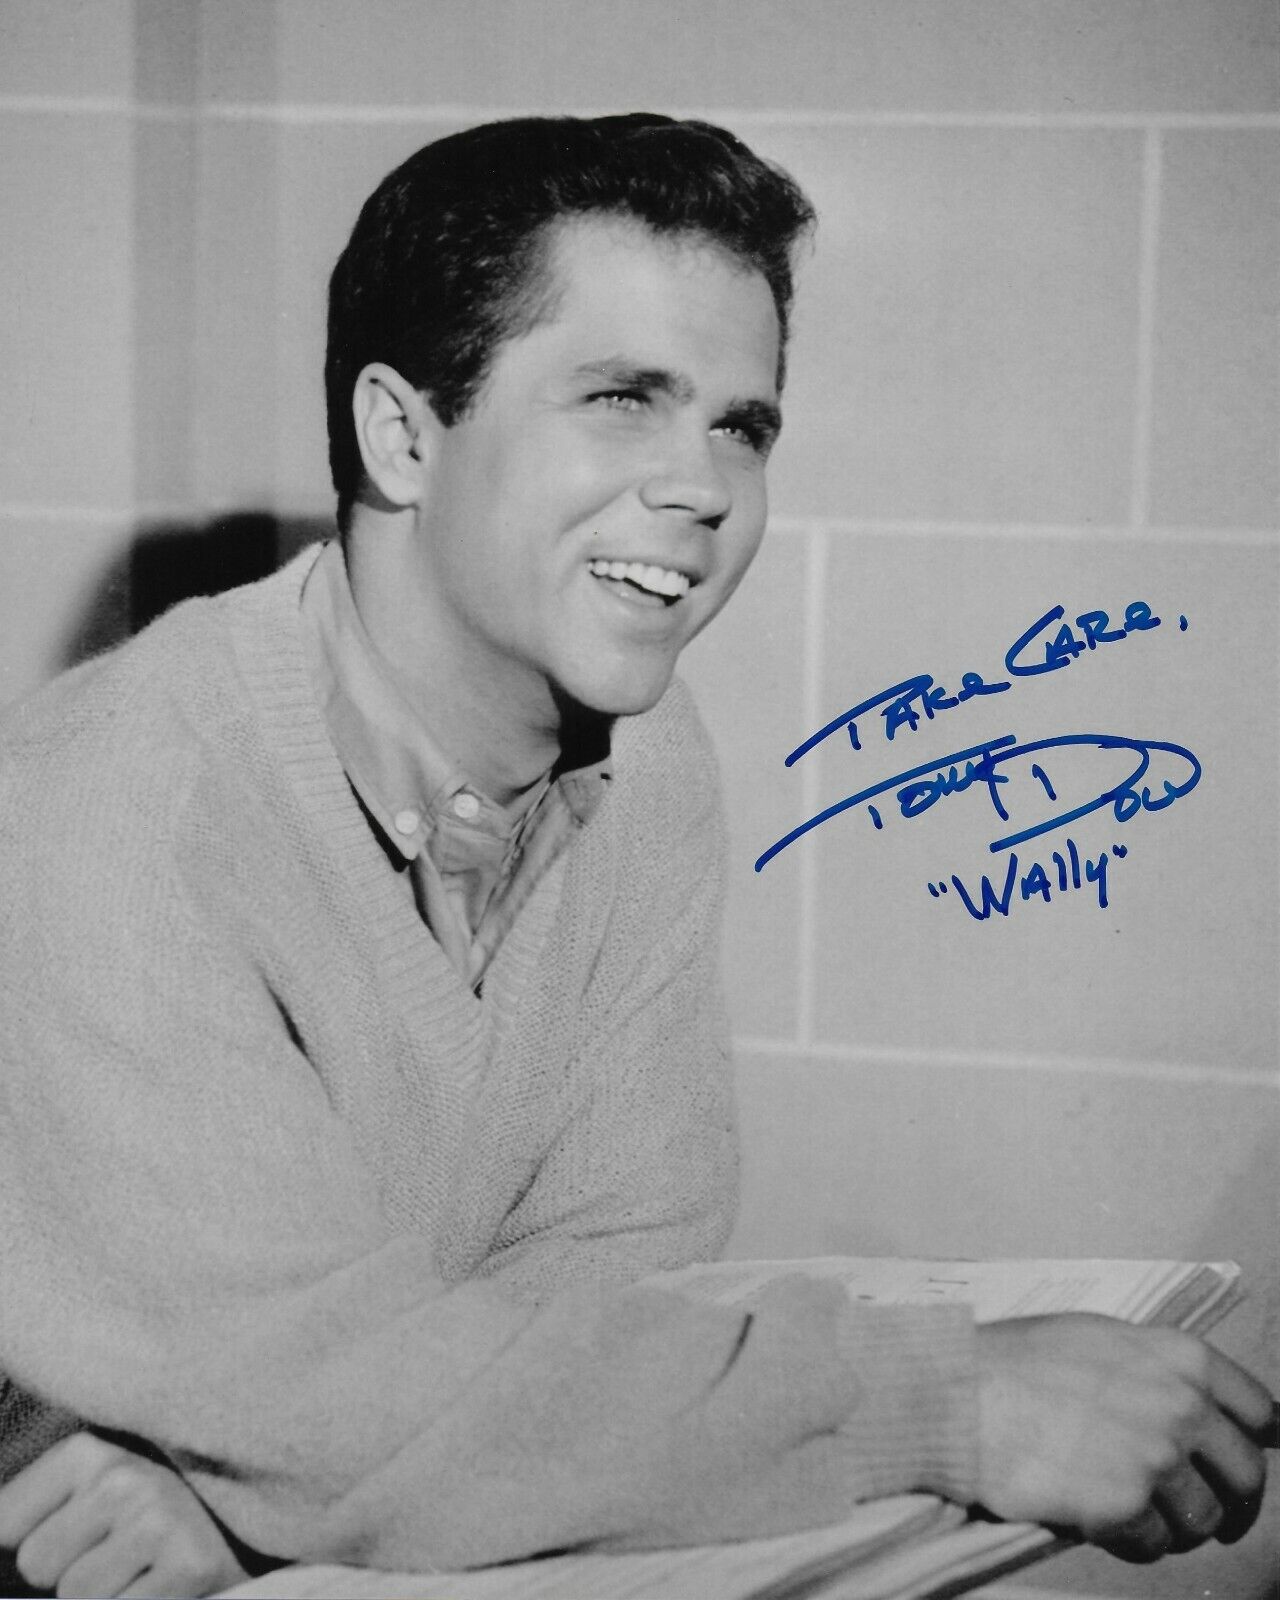 Tony Dow Leave it to Beaver Original Autographed 8X10 Photo Poster painting #15 signed @HShow